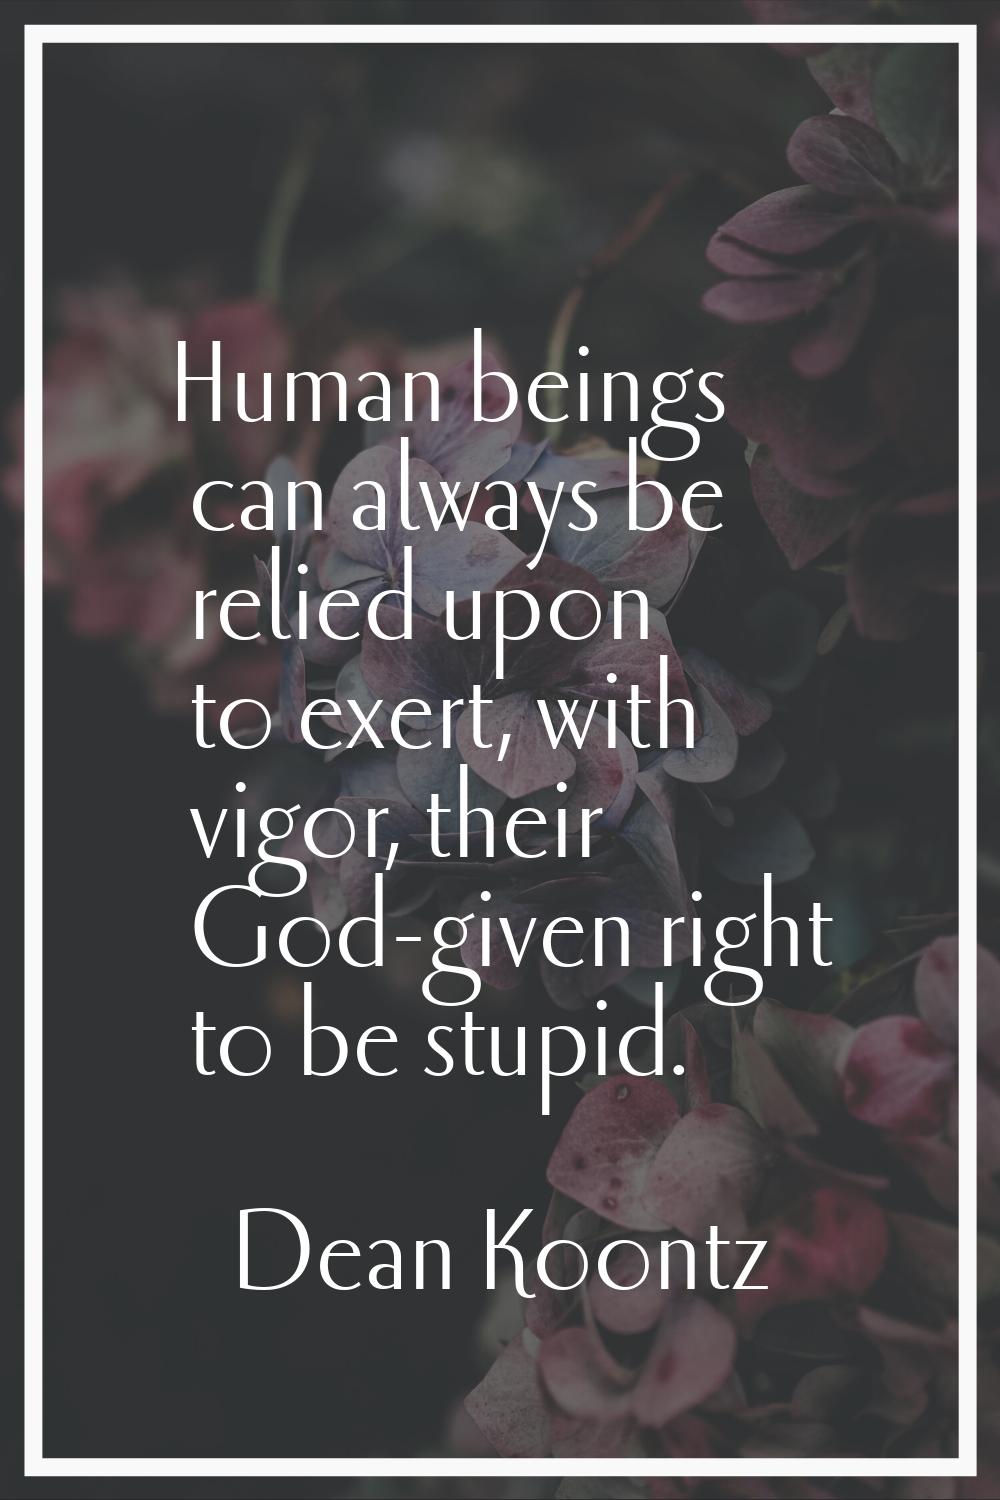 Human beings can always be relied upon to exert, with vigor, their God-given right to be stupid.